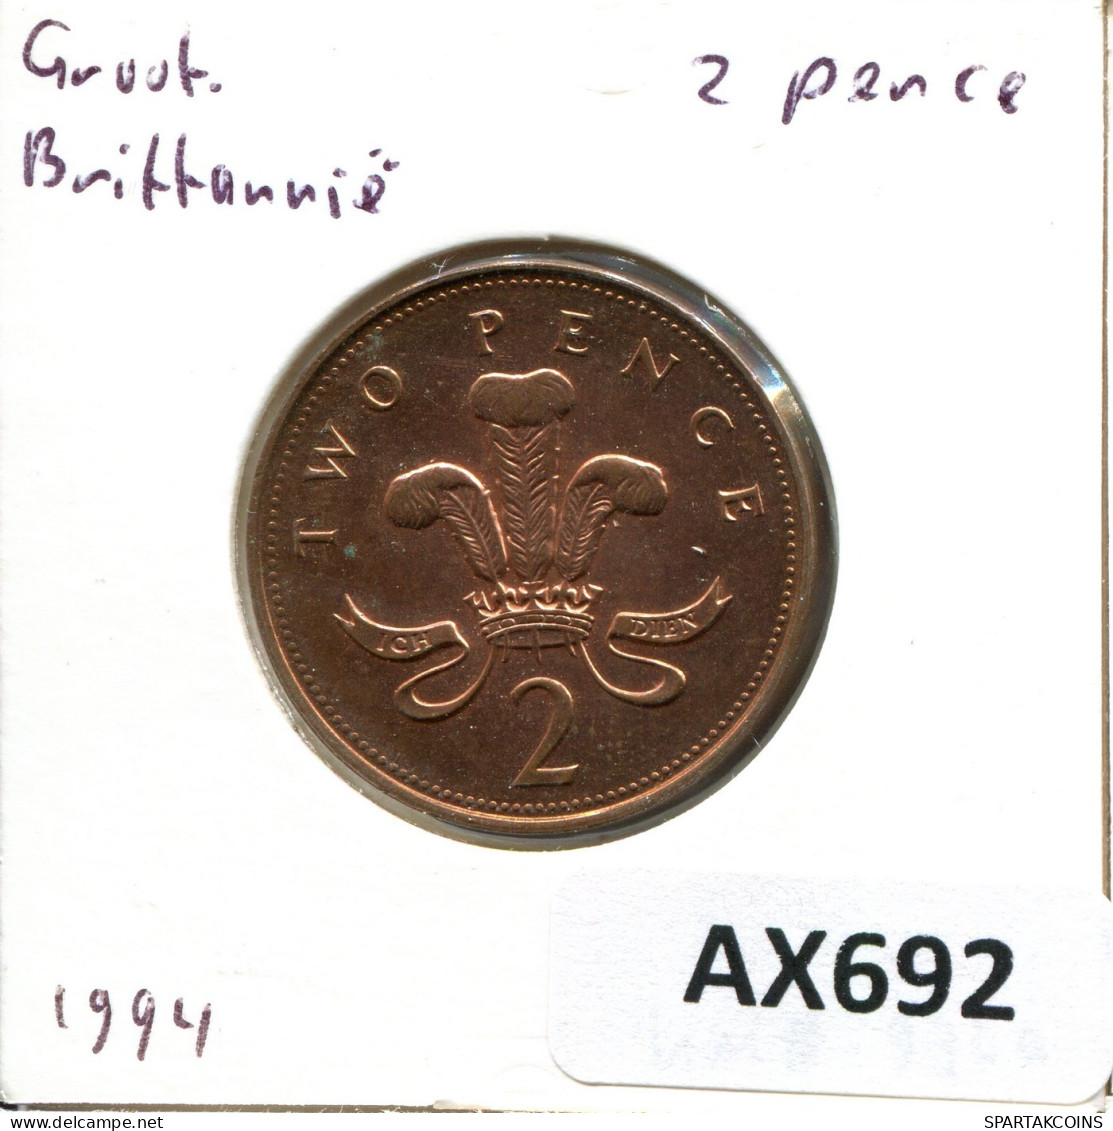 2 PENCE 1994 UK GREAT BRITAIN Coin #AX692.U.A - 2 Pence & 2 New Pence